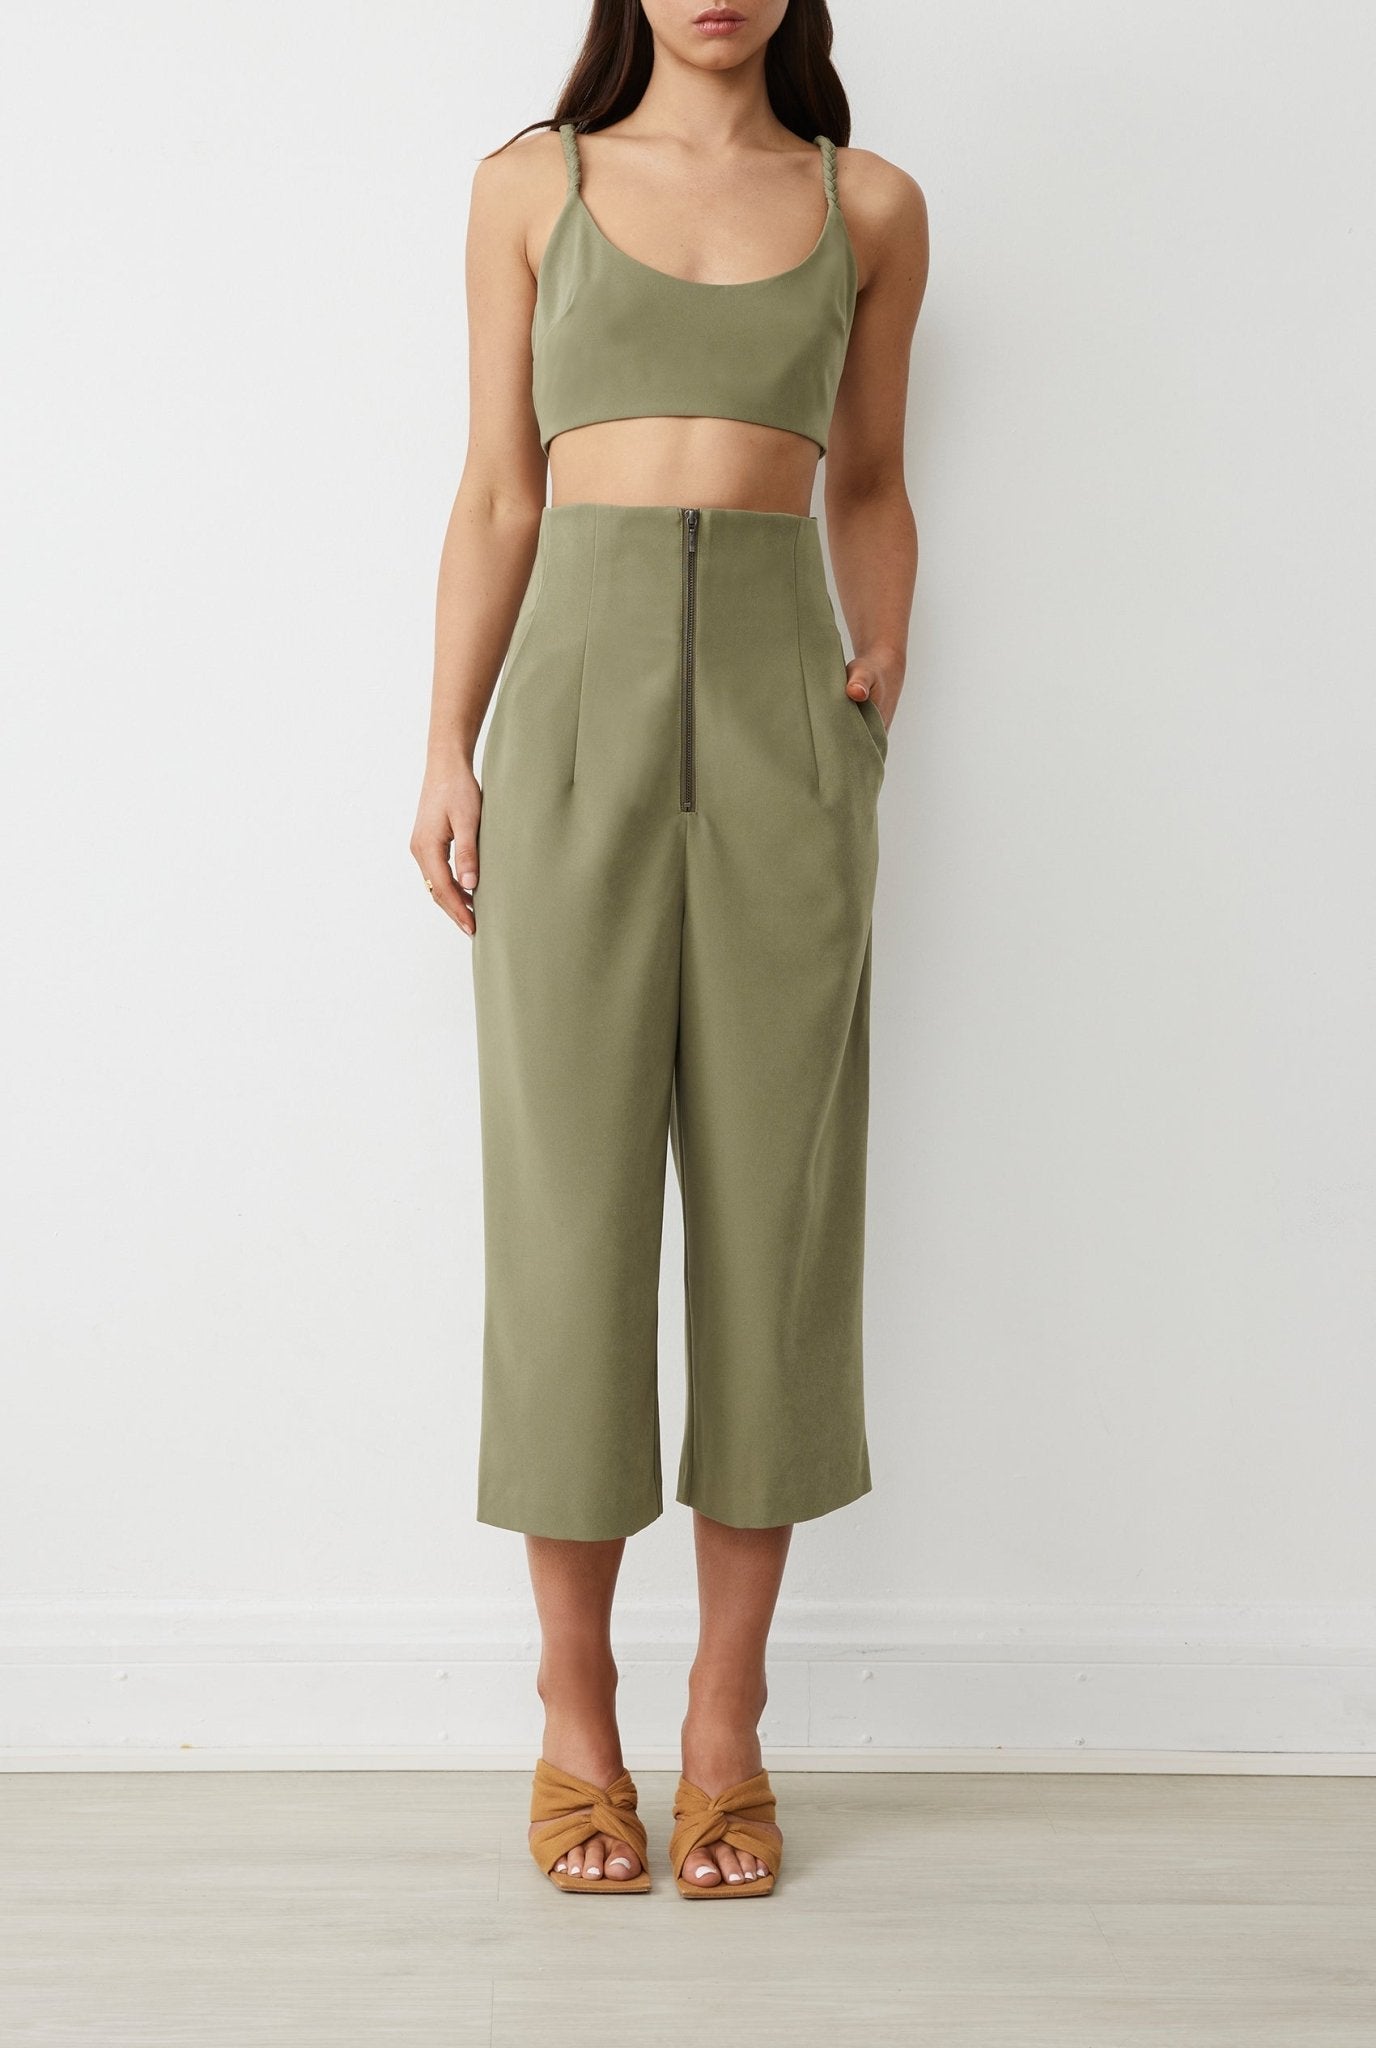 Auckland Pant in Moss - BOSKEMPER